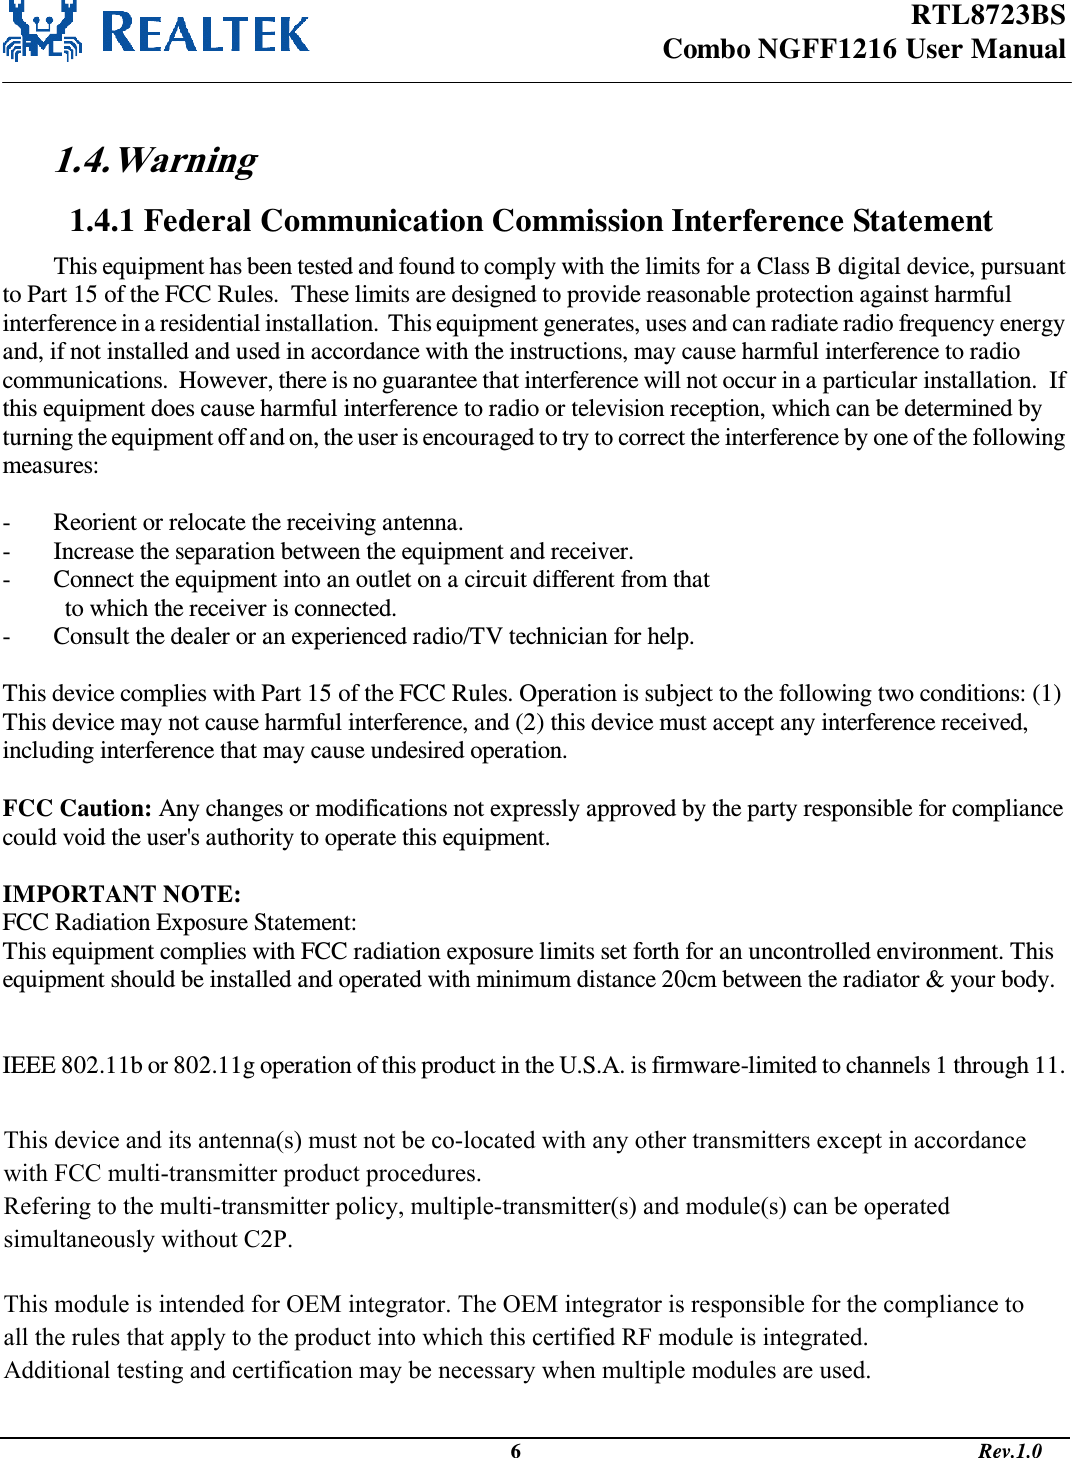 RTL8723BS Combo NGFF1216 User Manual                                                                                              6                                                                                       Rev.1.0   1.4. Warning  1.4.1 Federal Communication Commission Interference Statement This equipment has been tested and found to comply with the limits for a Class B digital device, pursuant to Part 15 of the FCC Rules.  These limits are designed to provide reasonable protection against harmful interference in a residential installation.  This equipment generates, uses and can radiate radio frequency energy and, if not installed and used in accordance with the instructions, may cause harmful interference to radio communications.  However, there is no guarantee that interference will not occur in a particular installation.  If this equipment does cause harmful interference to radio or television reception, which can be determined by turning the equipment off and on, the user is encouraged to try to correct the interference by one of the following measures:  -  Reorient or relocate the receiving antenna. -  Increase the separation between the equipment and receiver. -  Connect the equipment into an outlet on a circuit different from that to which the receiver is connected. -  Consult the dealer or an experienced radio/TV technician for help.  This device complies with Part 15 of the FCC Rules. Operation is subject to the following two conditions: (1) This device may not cause harmful interference, and (2) this device must accept any interference received, including interference that may cause undesired operation.  FCC Caution: Any changes or modifications not expressly approved by the party responsible for compliance could void the user&apos;s authority to operate this equipment.  IMPORTANT NOTE: FCC Radiation Exposure Statement: This equipment complies with FCC radiation exposure limits set forth for an uncontrolled environment. This equipment should be installed and operated with minimum distance 20cm between the radiator &amp; your body. This transmitter must not be co-located or operating in conjunction with any other antenna or transmitter.  IEEE 802.11b or 802.11g operation of this product in the U.S.A. is firmware-limited to channels 1 through 11.  This device is intended only for OEM integrators under the following conditions: 1) The antenna must be installed such that 20 cm is maintained between the antenna and users, and  2) The transmitter module may not be co-located with any other transmitter or antenna,  3) For all products market in US, OEM has to limit the operation channels in CH1 to CH11 for 2.4G band by supplied firmware programming tool. OEM shall not supply any tool or info to the end-user regarding to Regulatory Domain change.  As long as 3 conditions above are met, further transmitter test will not be required. However, the OEM integrator is still responsible for testing their end-product for any additional compliance requirements required with this module installed (for example, digital device emissions, PC peripheral requirements, etc.).  This device and its antenna(s) must not be co-located with any other transmitters except in accordance with FCC multi-transmitter product procedures. Refering to the multi-transmitter policy, multiple-transmitter(s) and module(s) can be operated simultaneously without C2P.   This module is intended for OEM integrator. The OEM integrator is responsible for the compliance to all the rules that apply to the product into which this certified RF module is integrated. Additional testing and certification may be necessary when multiple modules are used.